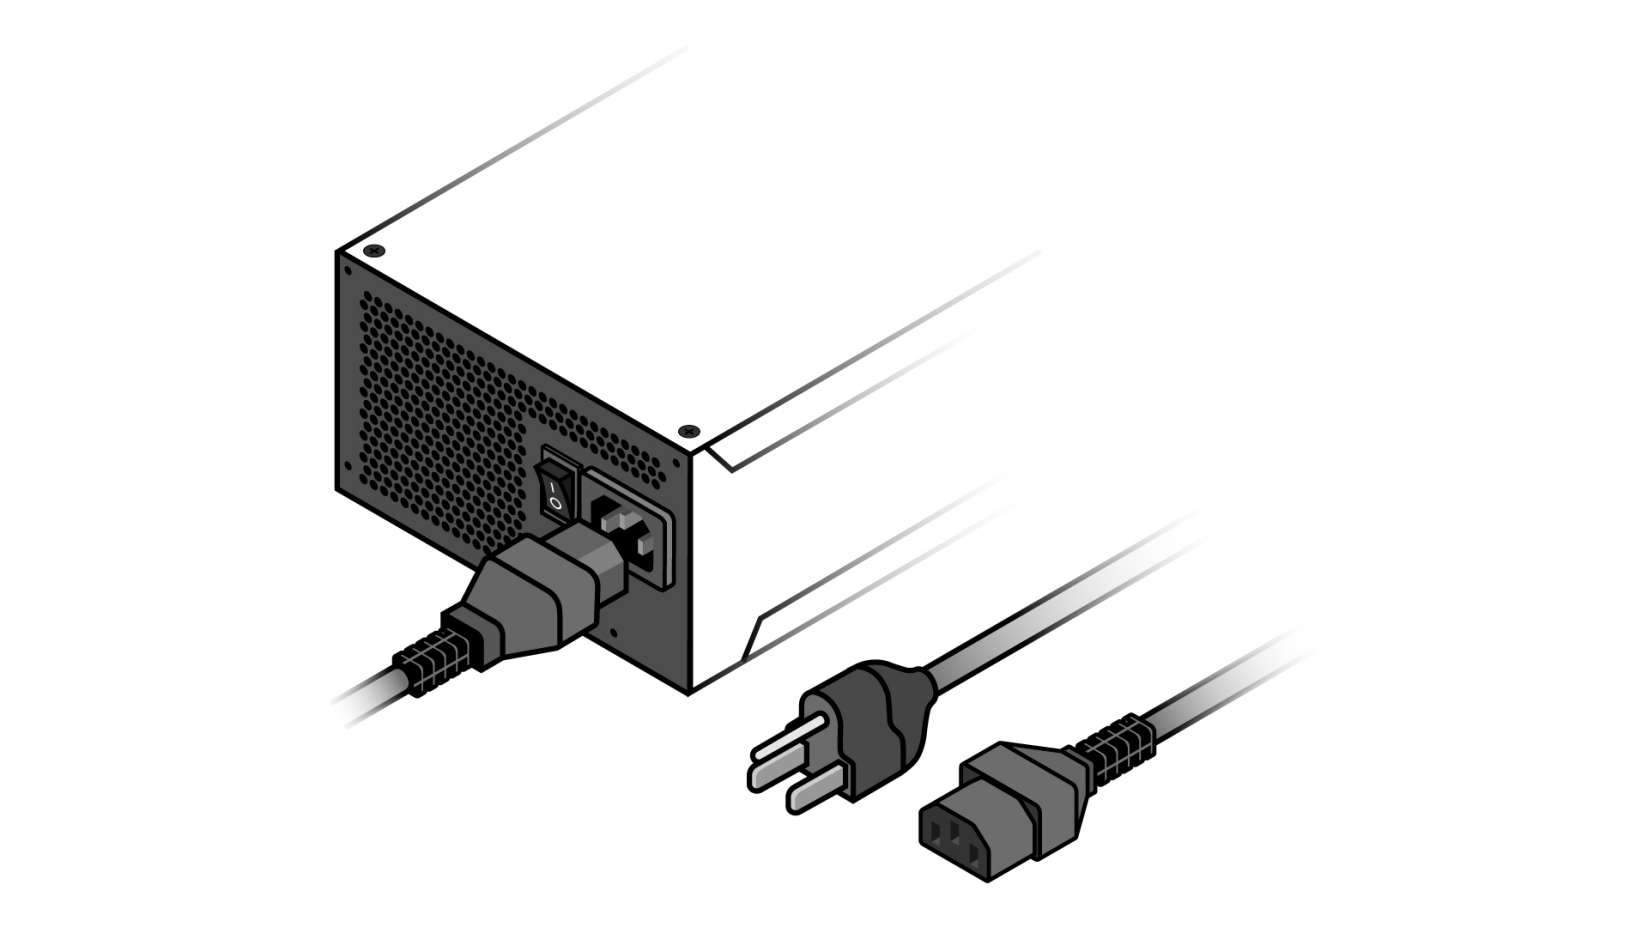 C13 power cable illustration